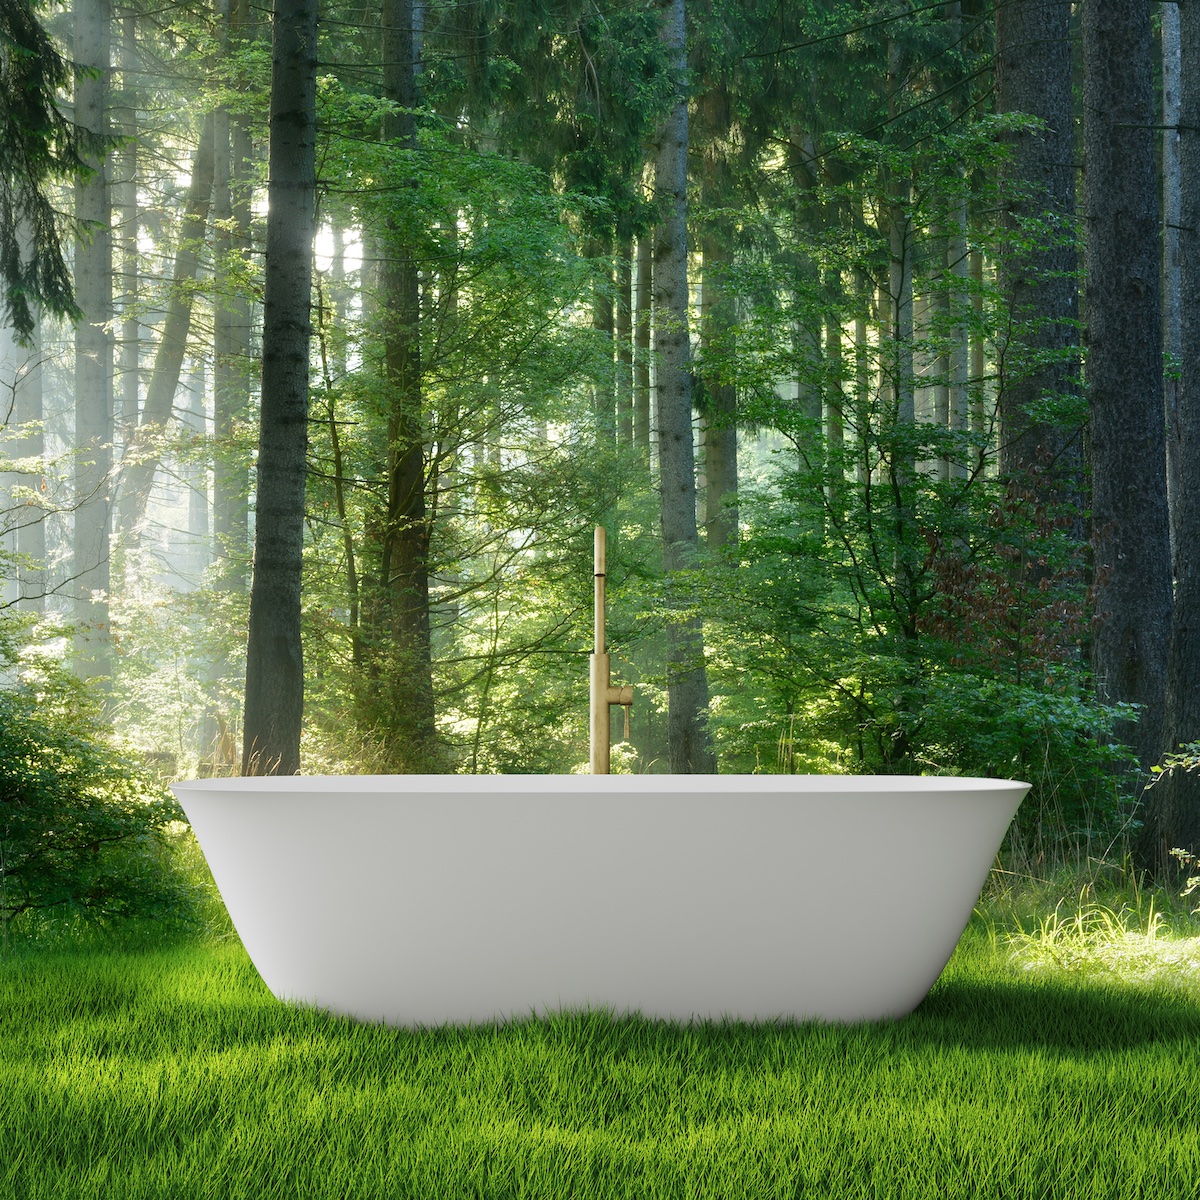 A freestanding white bath in the middle of a forest